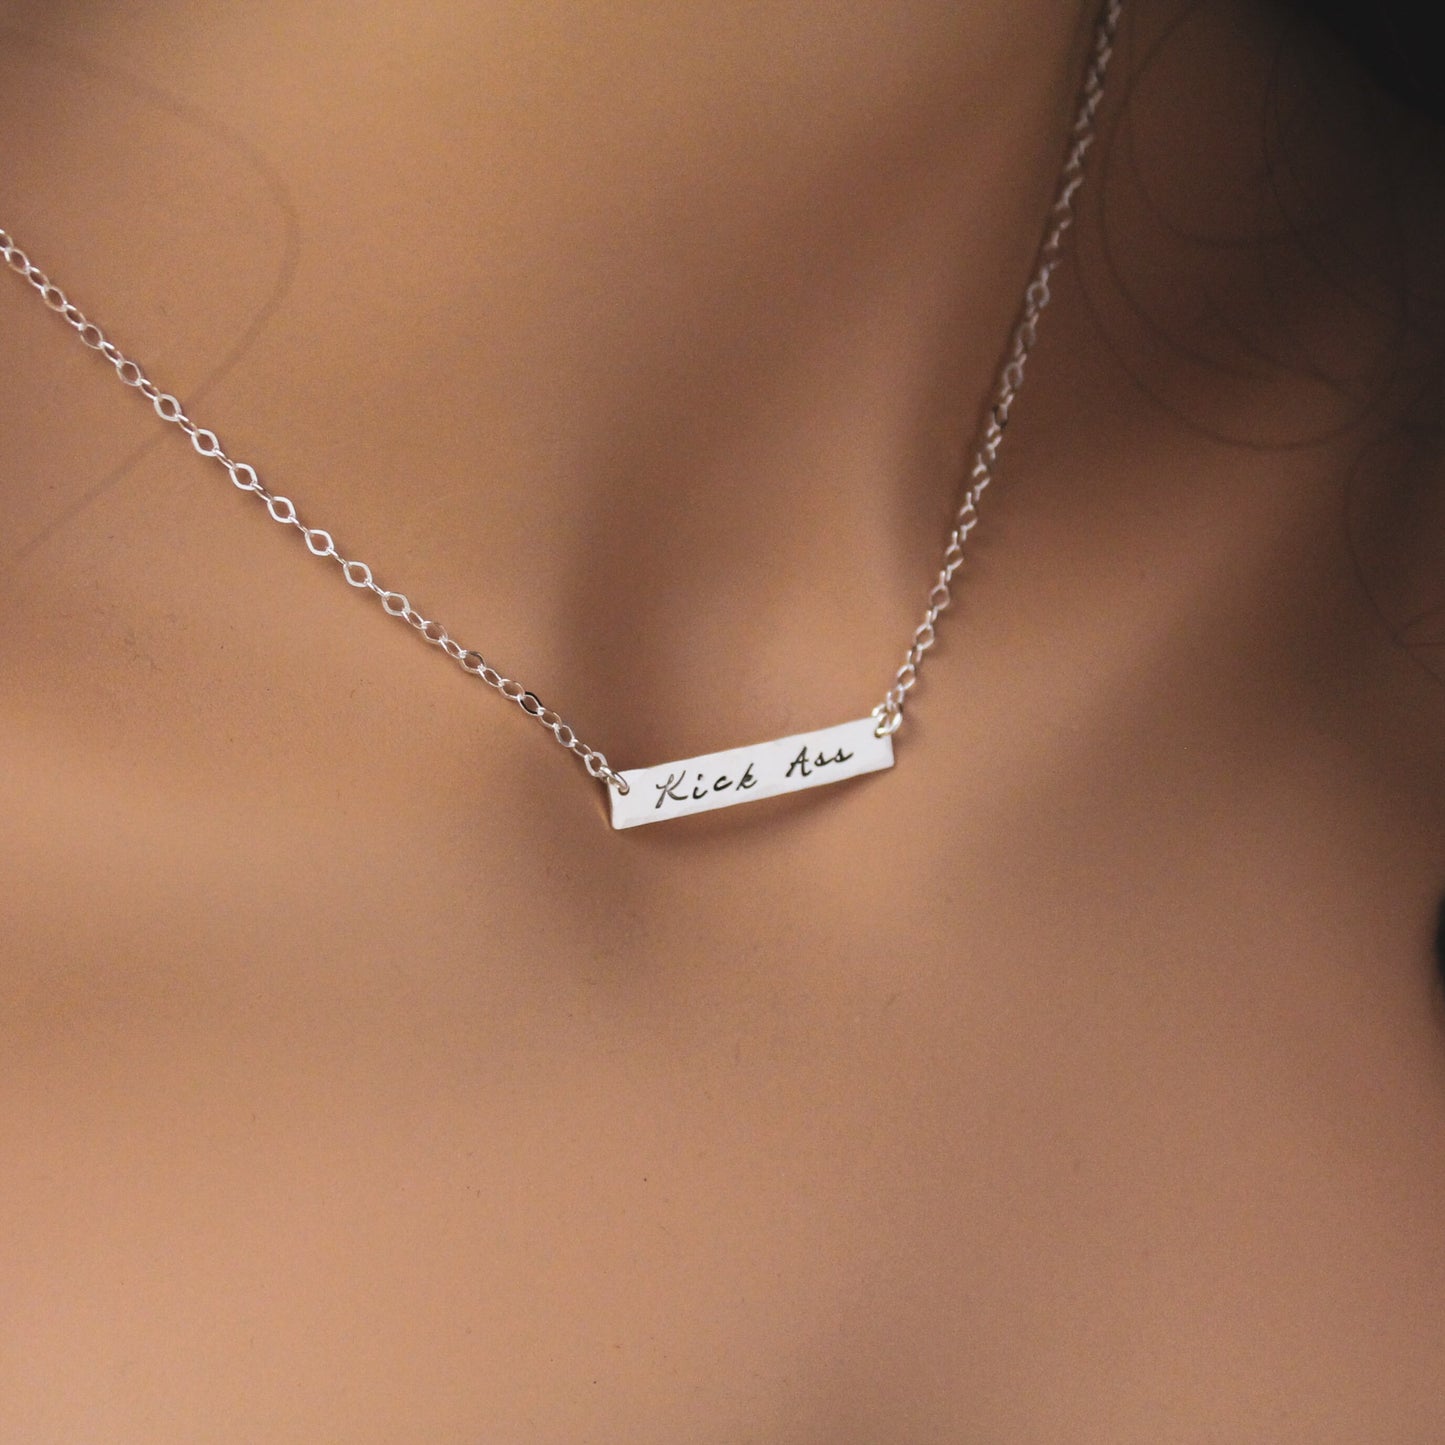 Sterling Silver Bar Necklace, Kick Ass Necklace, Personalized Bar Necklace, Silver Bar Necklace, Fun Grad Necklace, Hand Stamped Jewelry